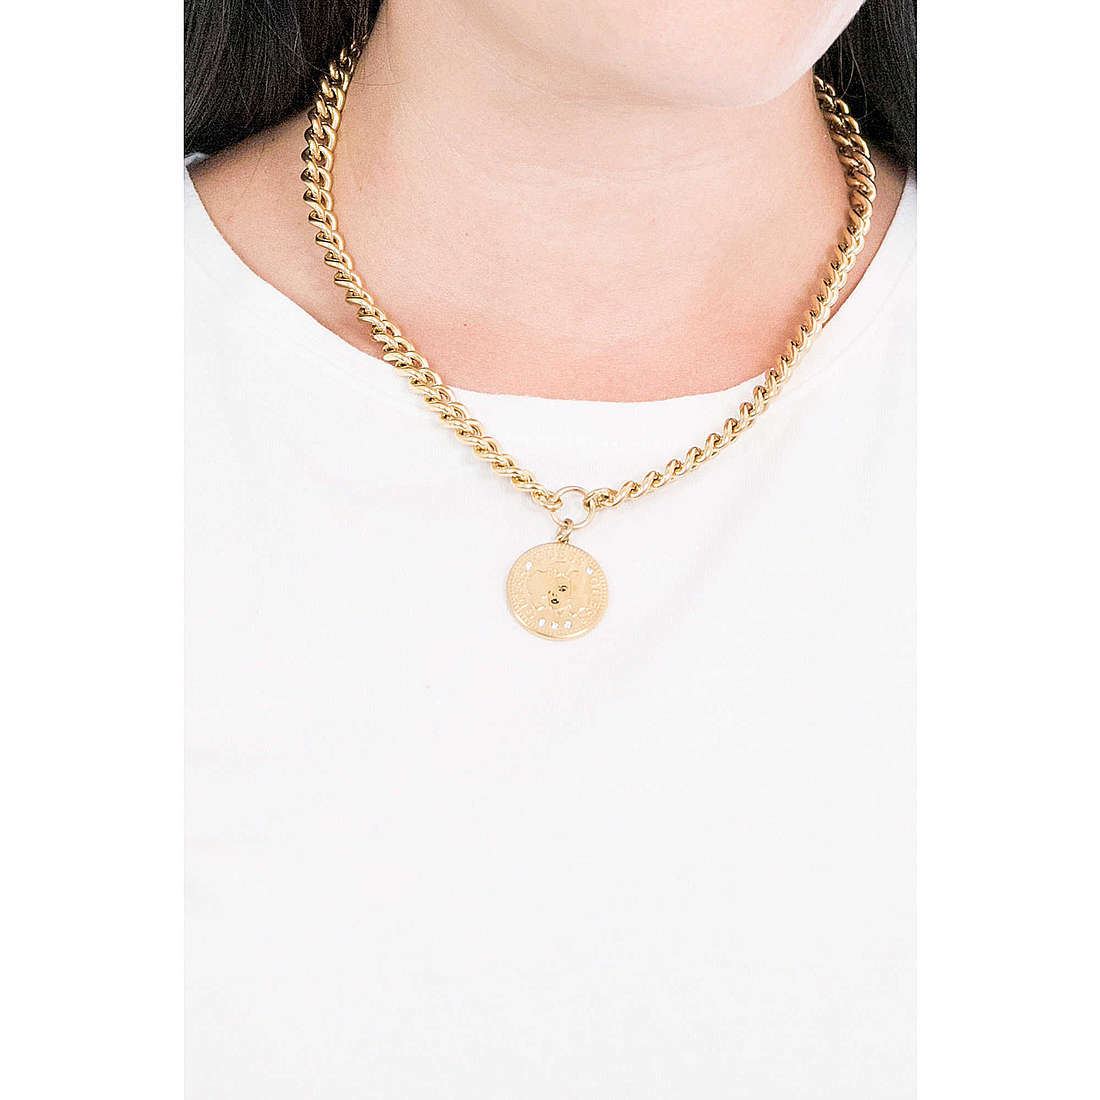 Guess necklaces woman UBN79121 wearing